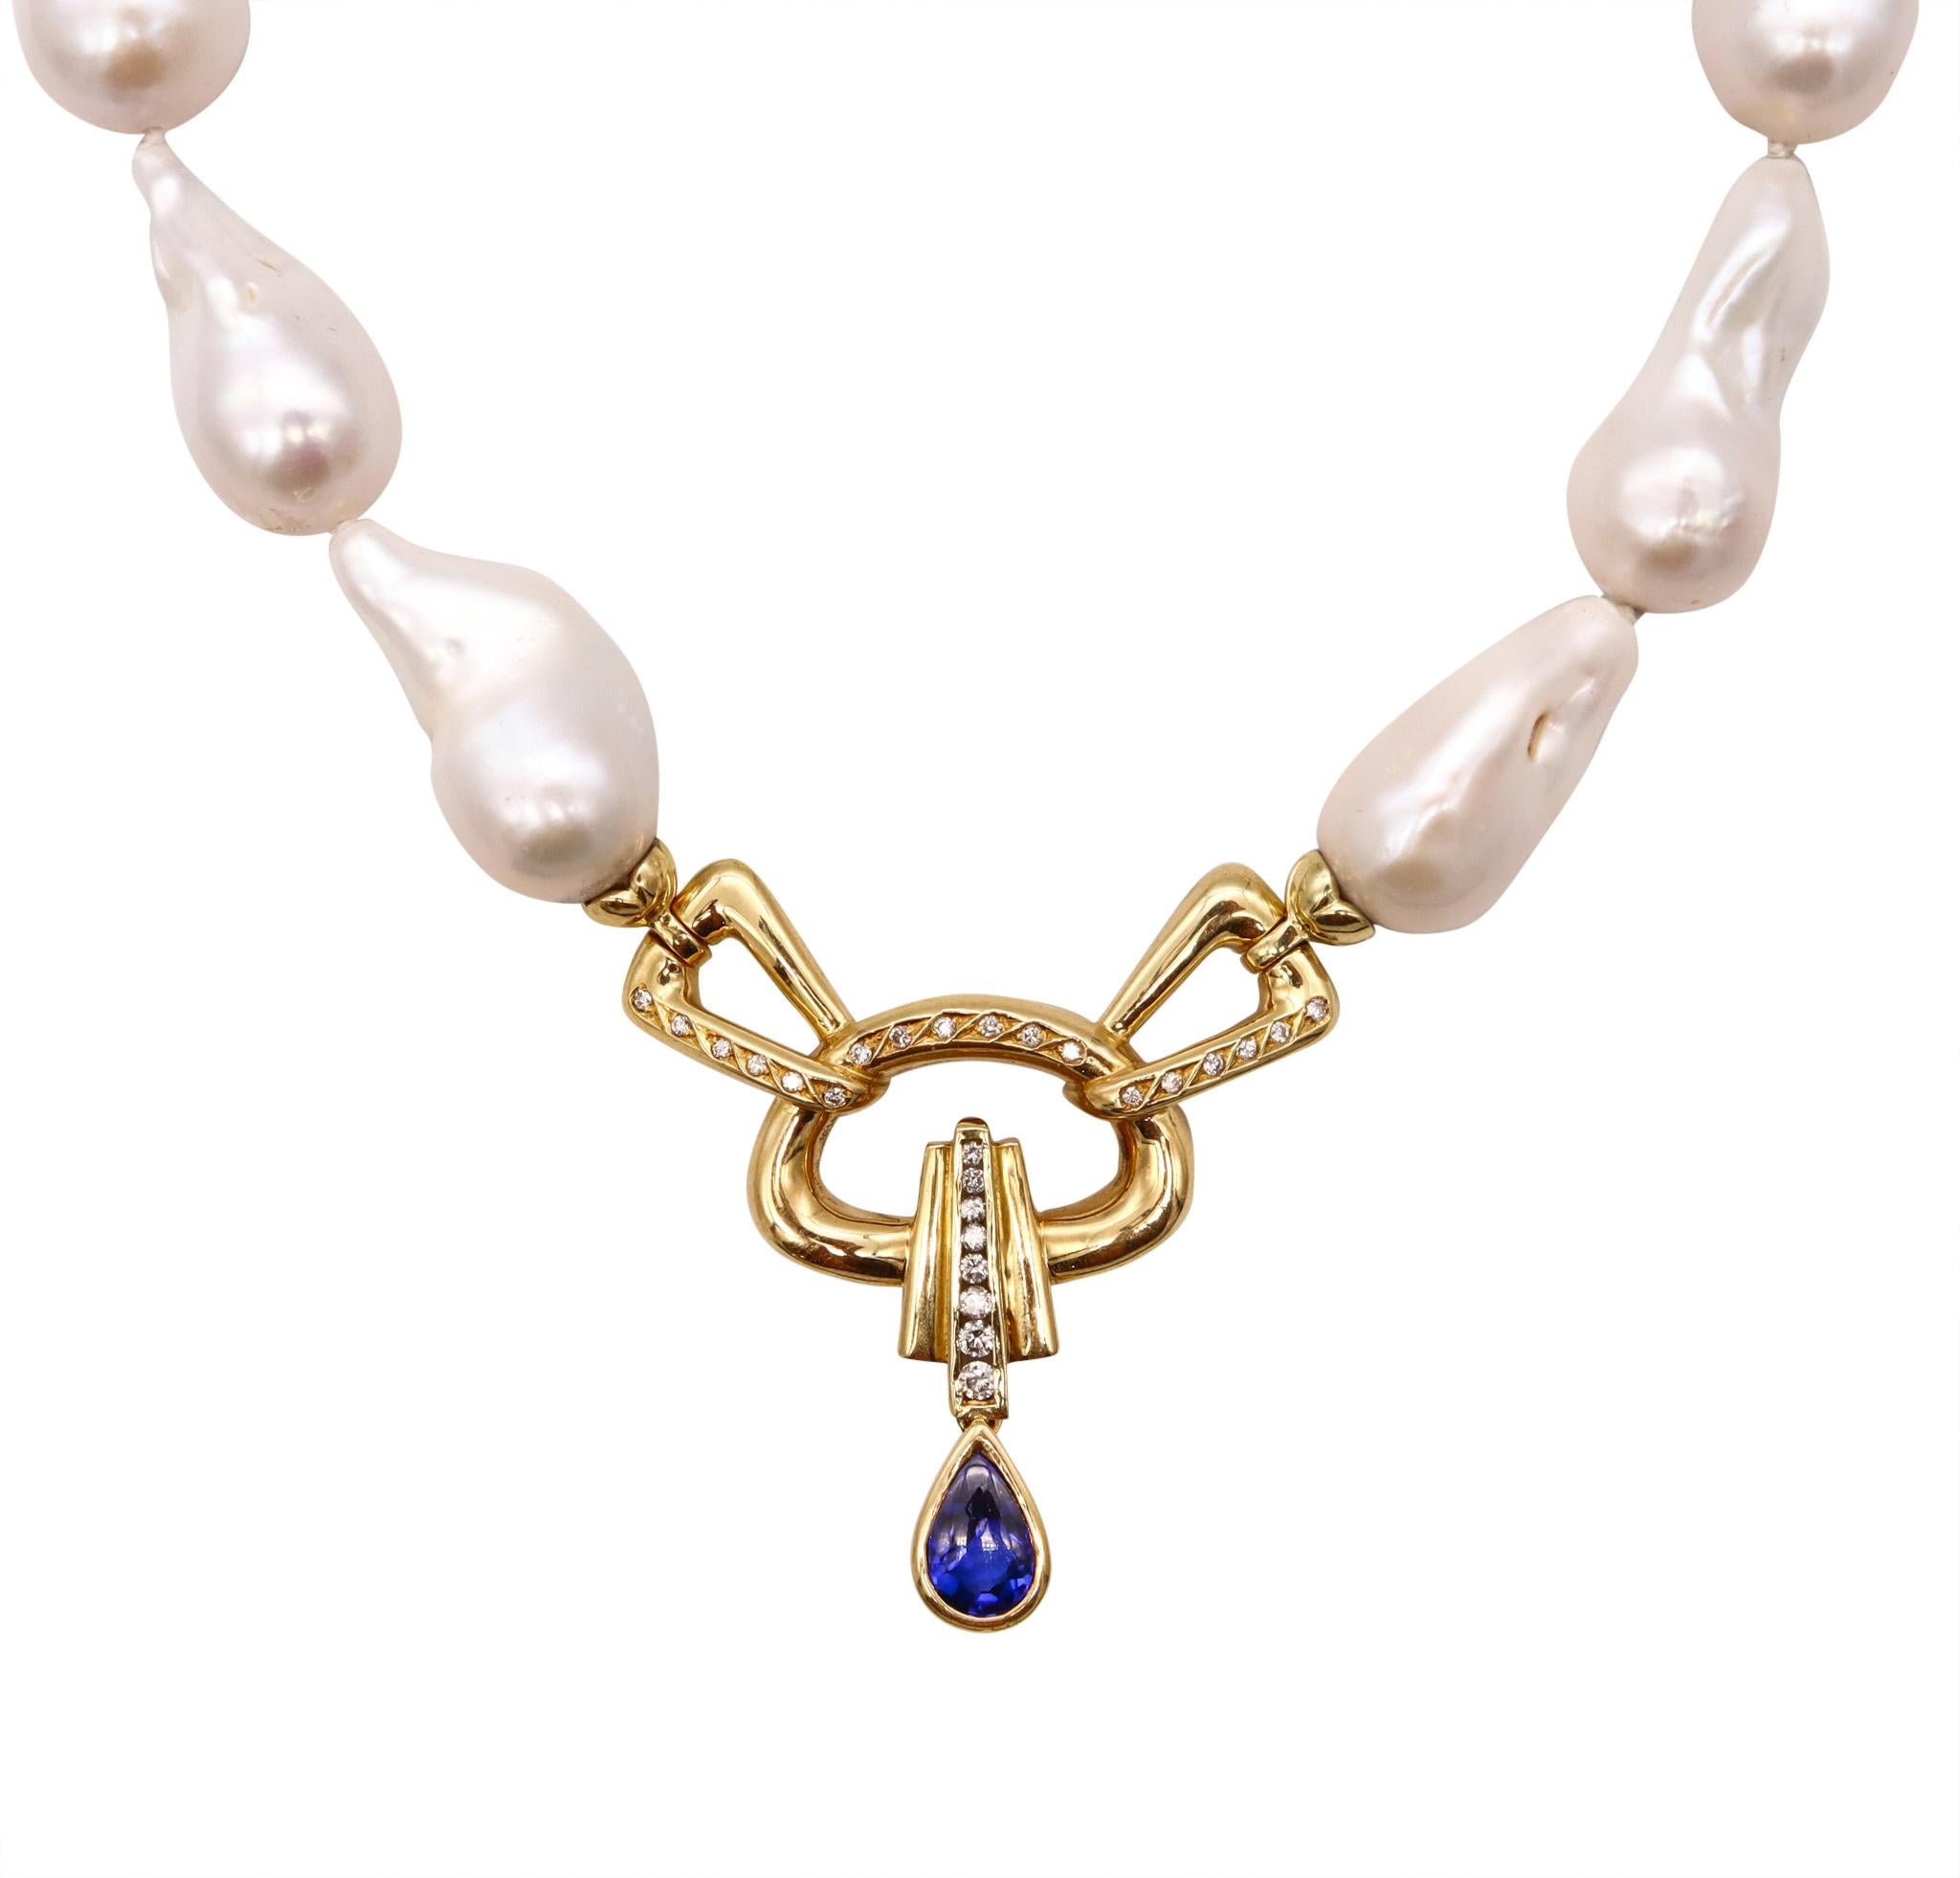 Italian Necklace with baroque pearls.

A nice contemporary modern necklace, made in Italy, with components crafted in solid yellow gold of 18 karats. It is composed by 18 baroque free-forms pearls of 14 mm by 30 mm and suited with an rounded fluted